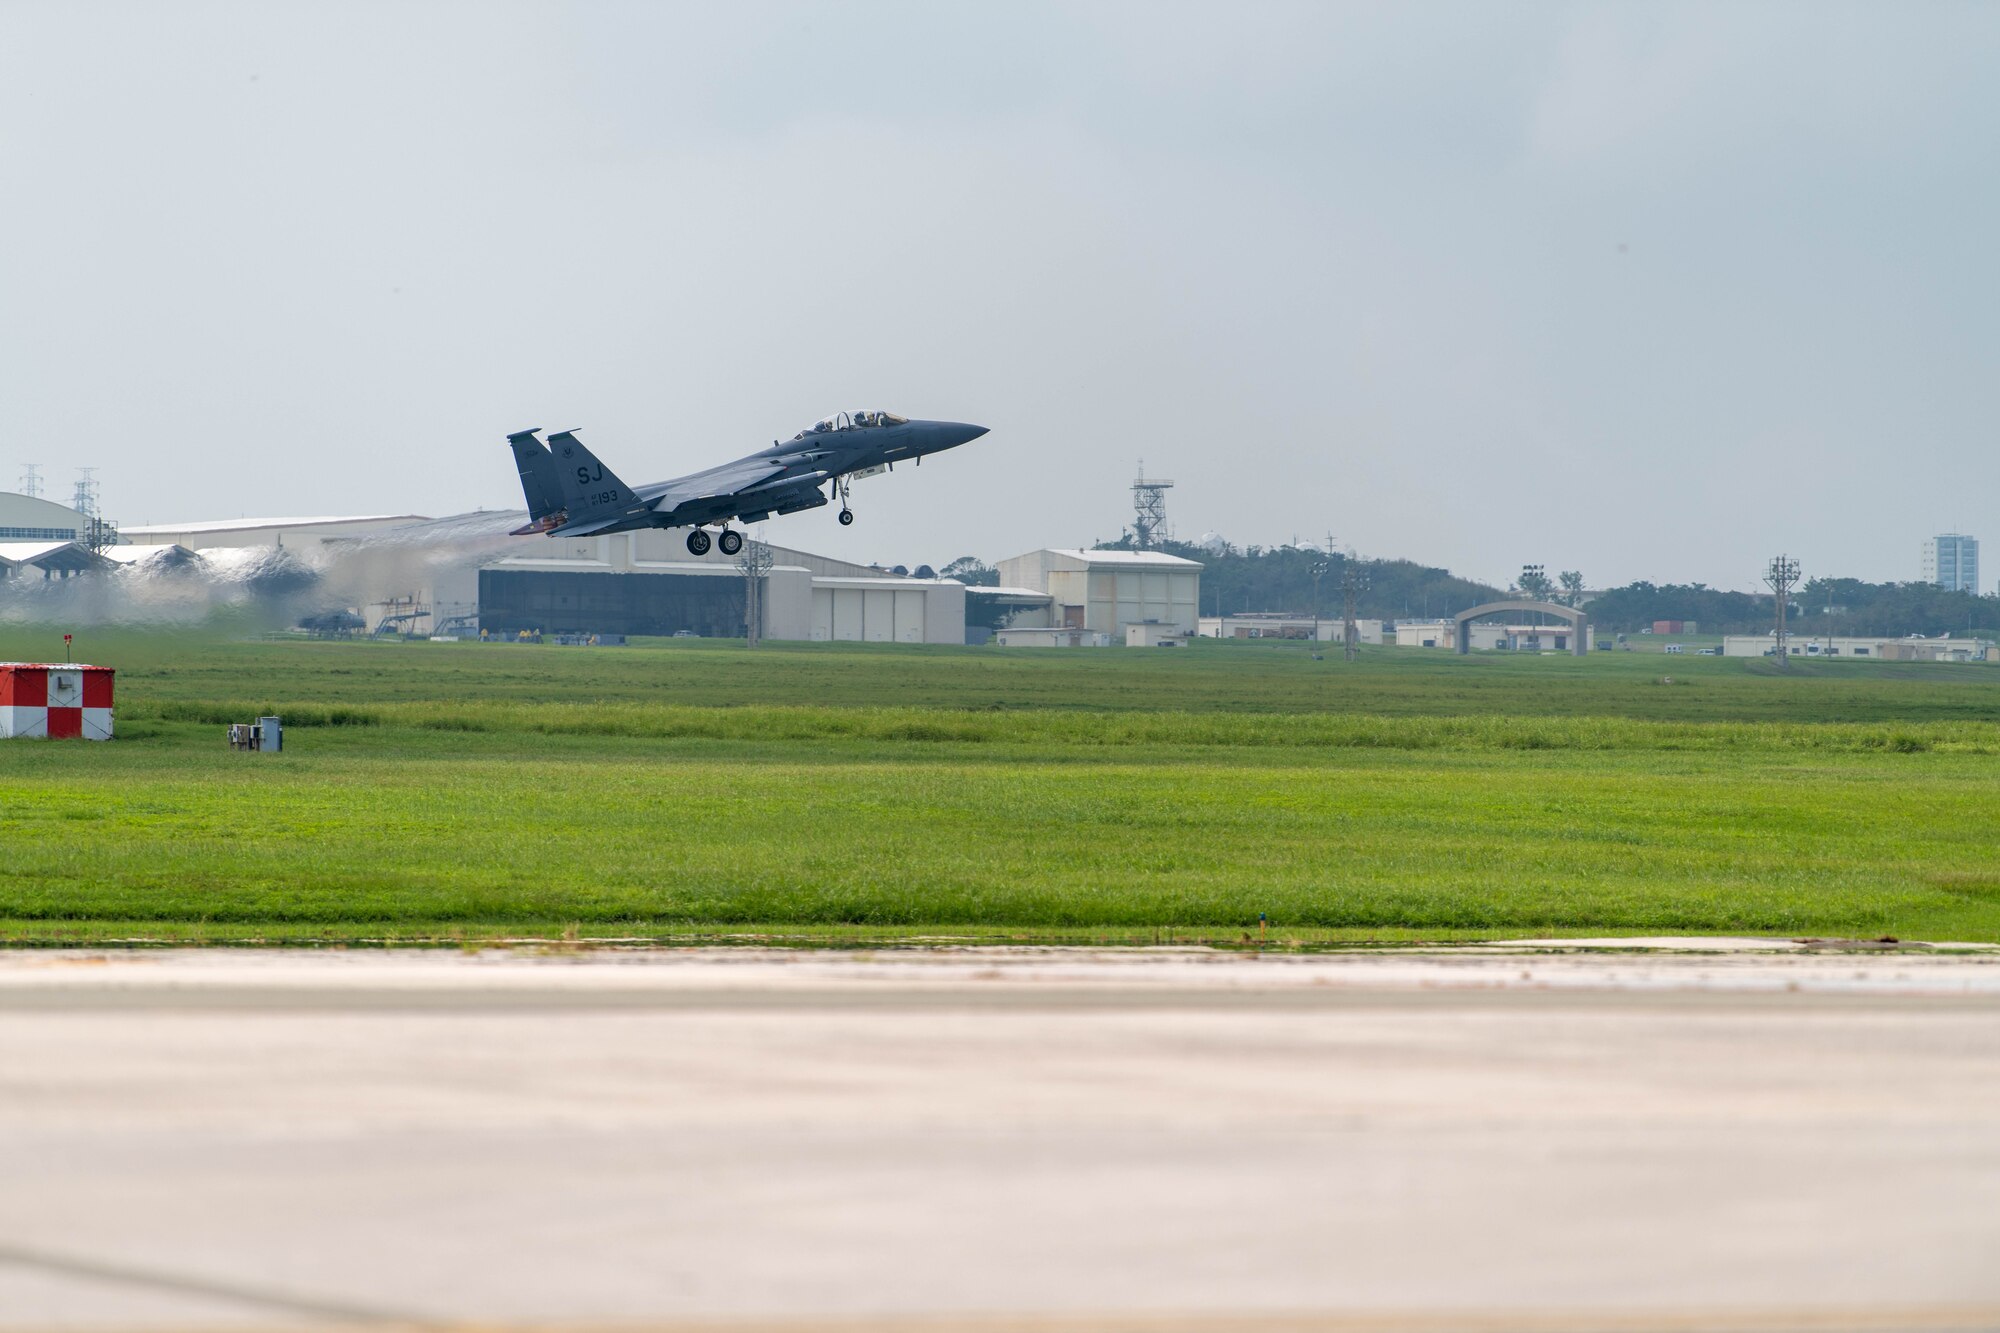 An F-15E Strike Eagle takes off from a runway.